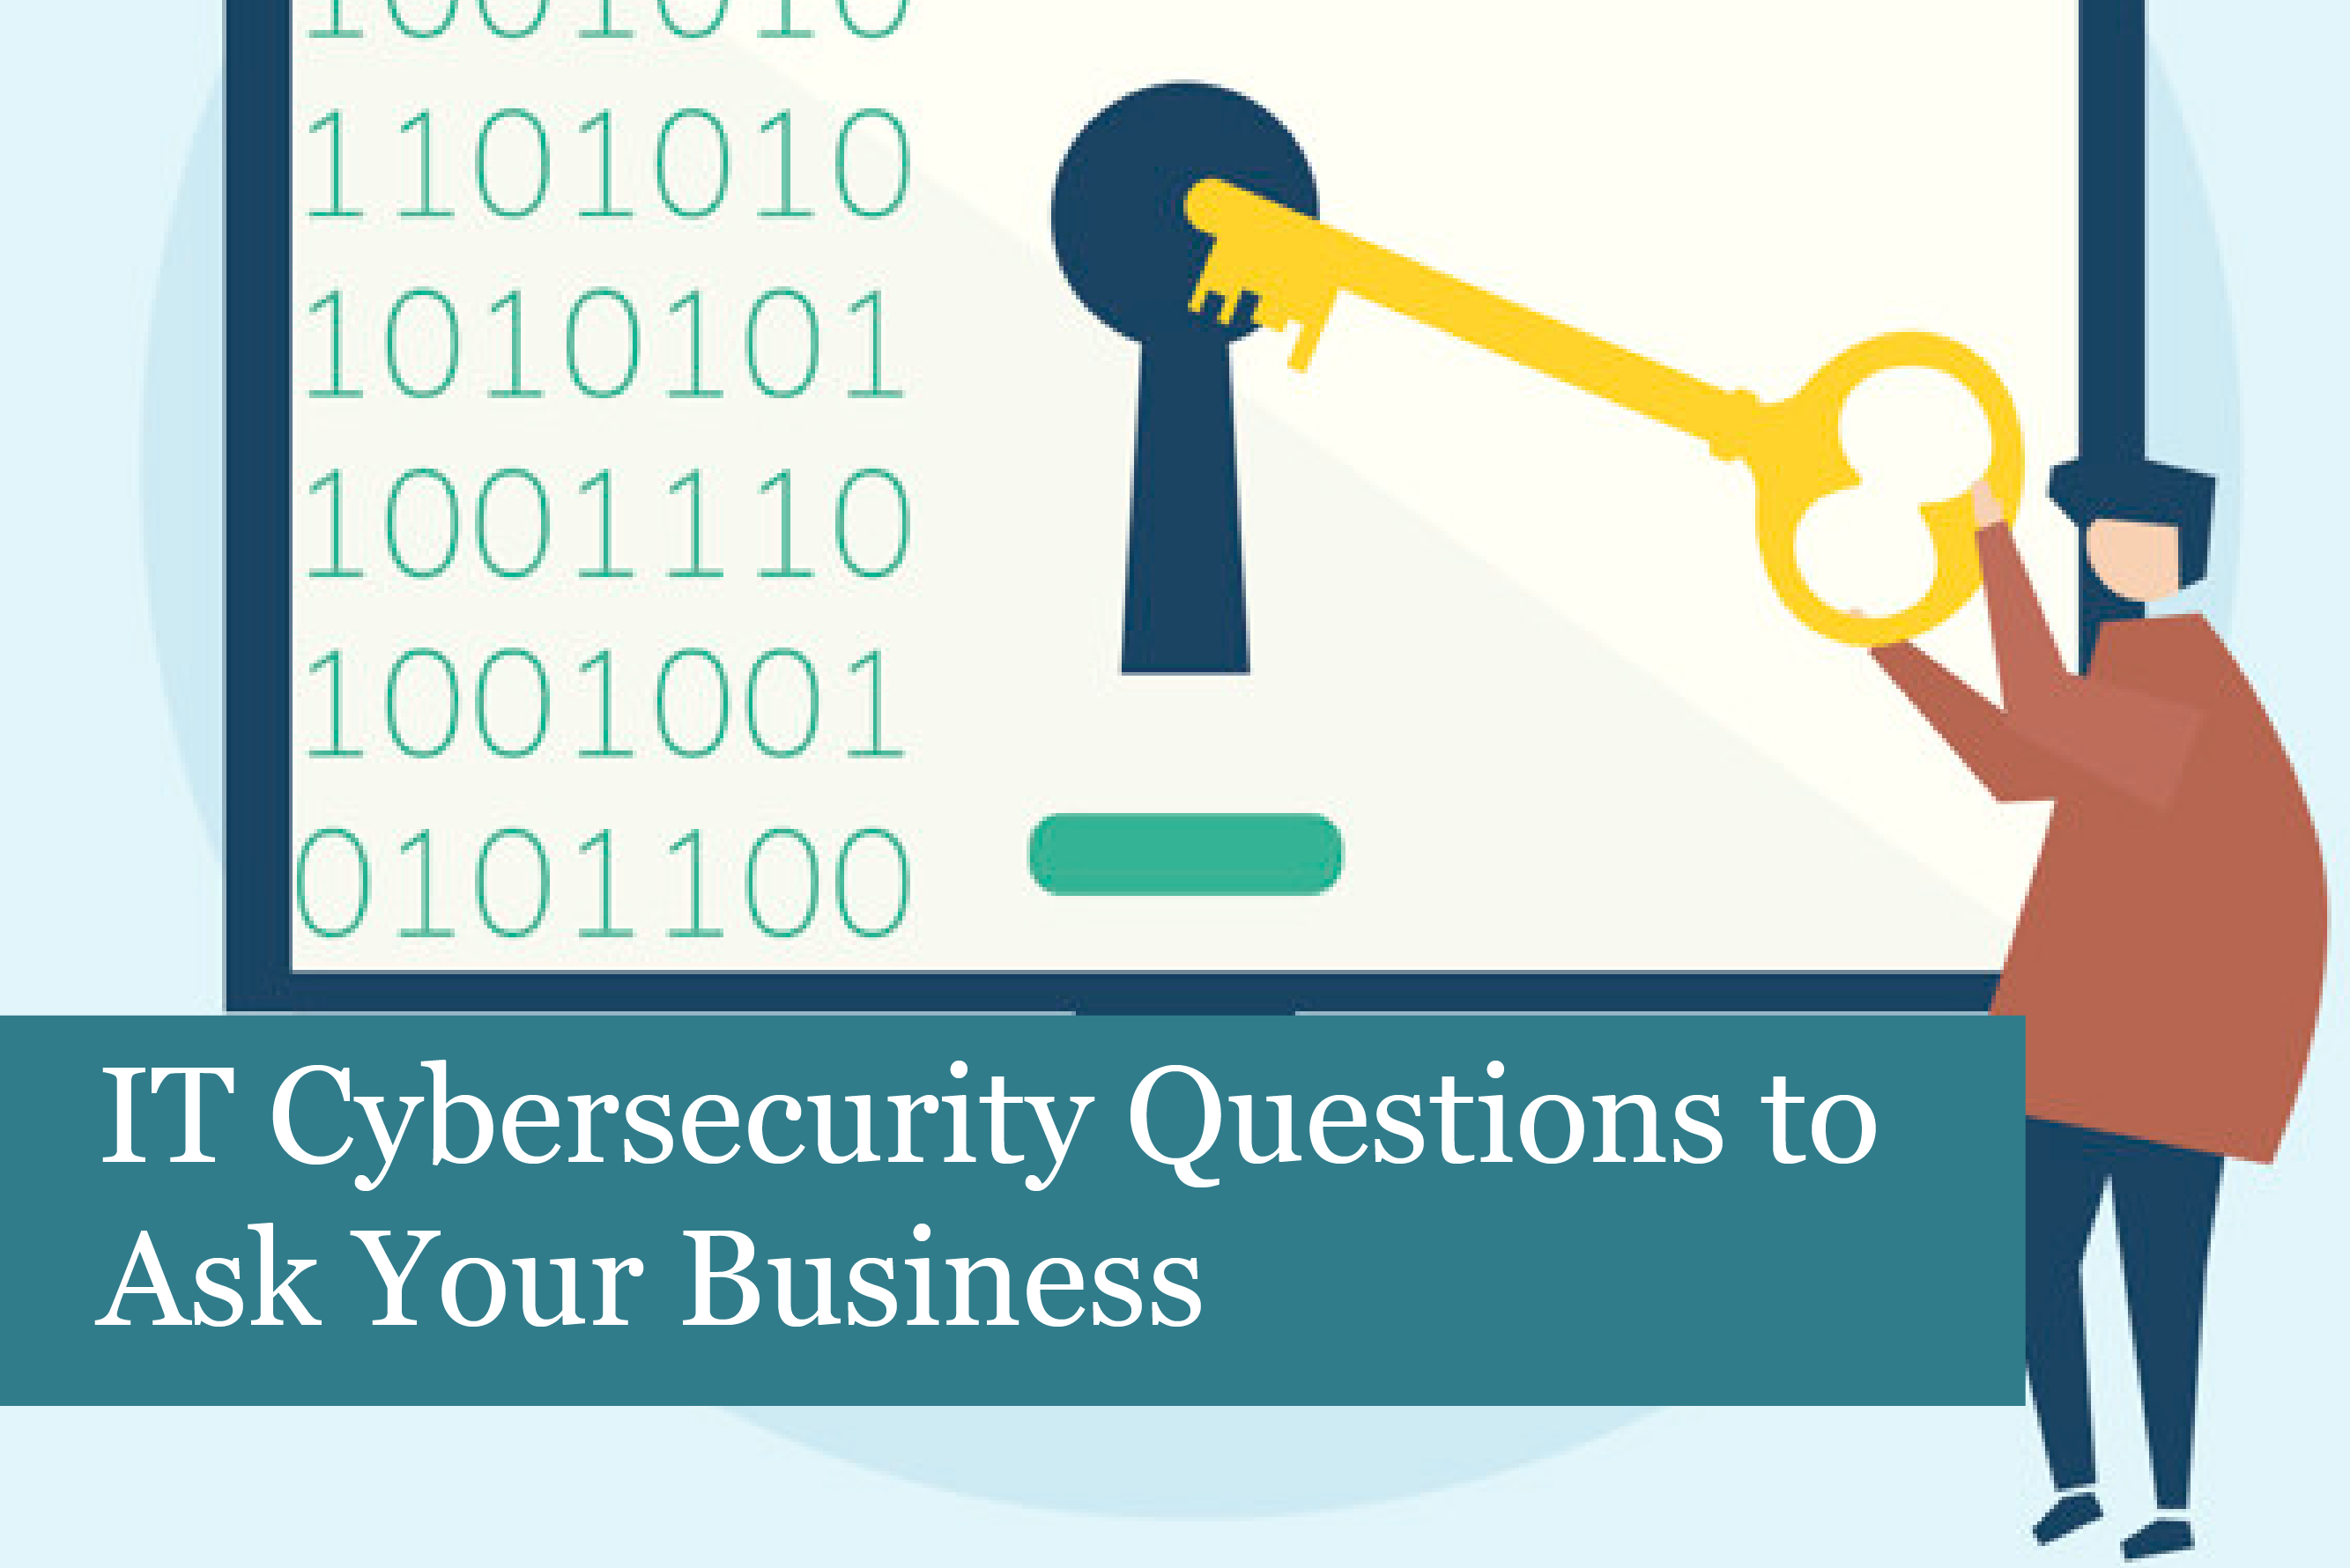 IT Cybersecurity Questions to Ask Your Business